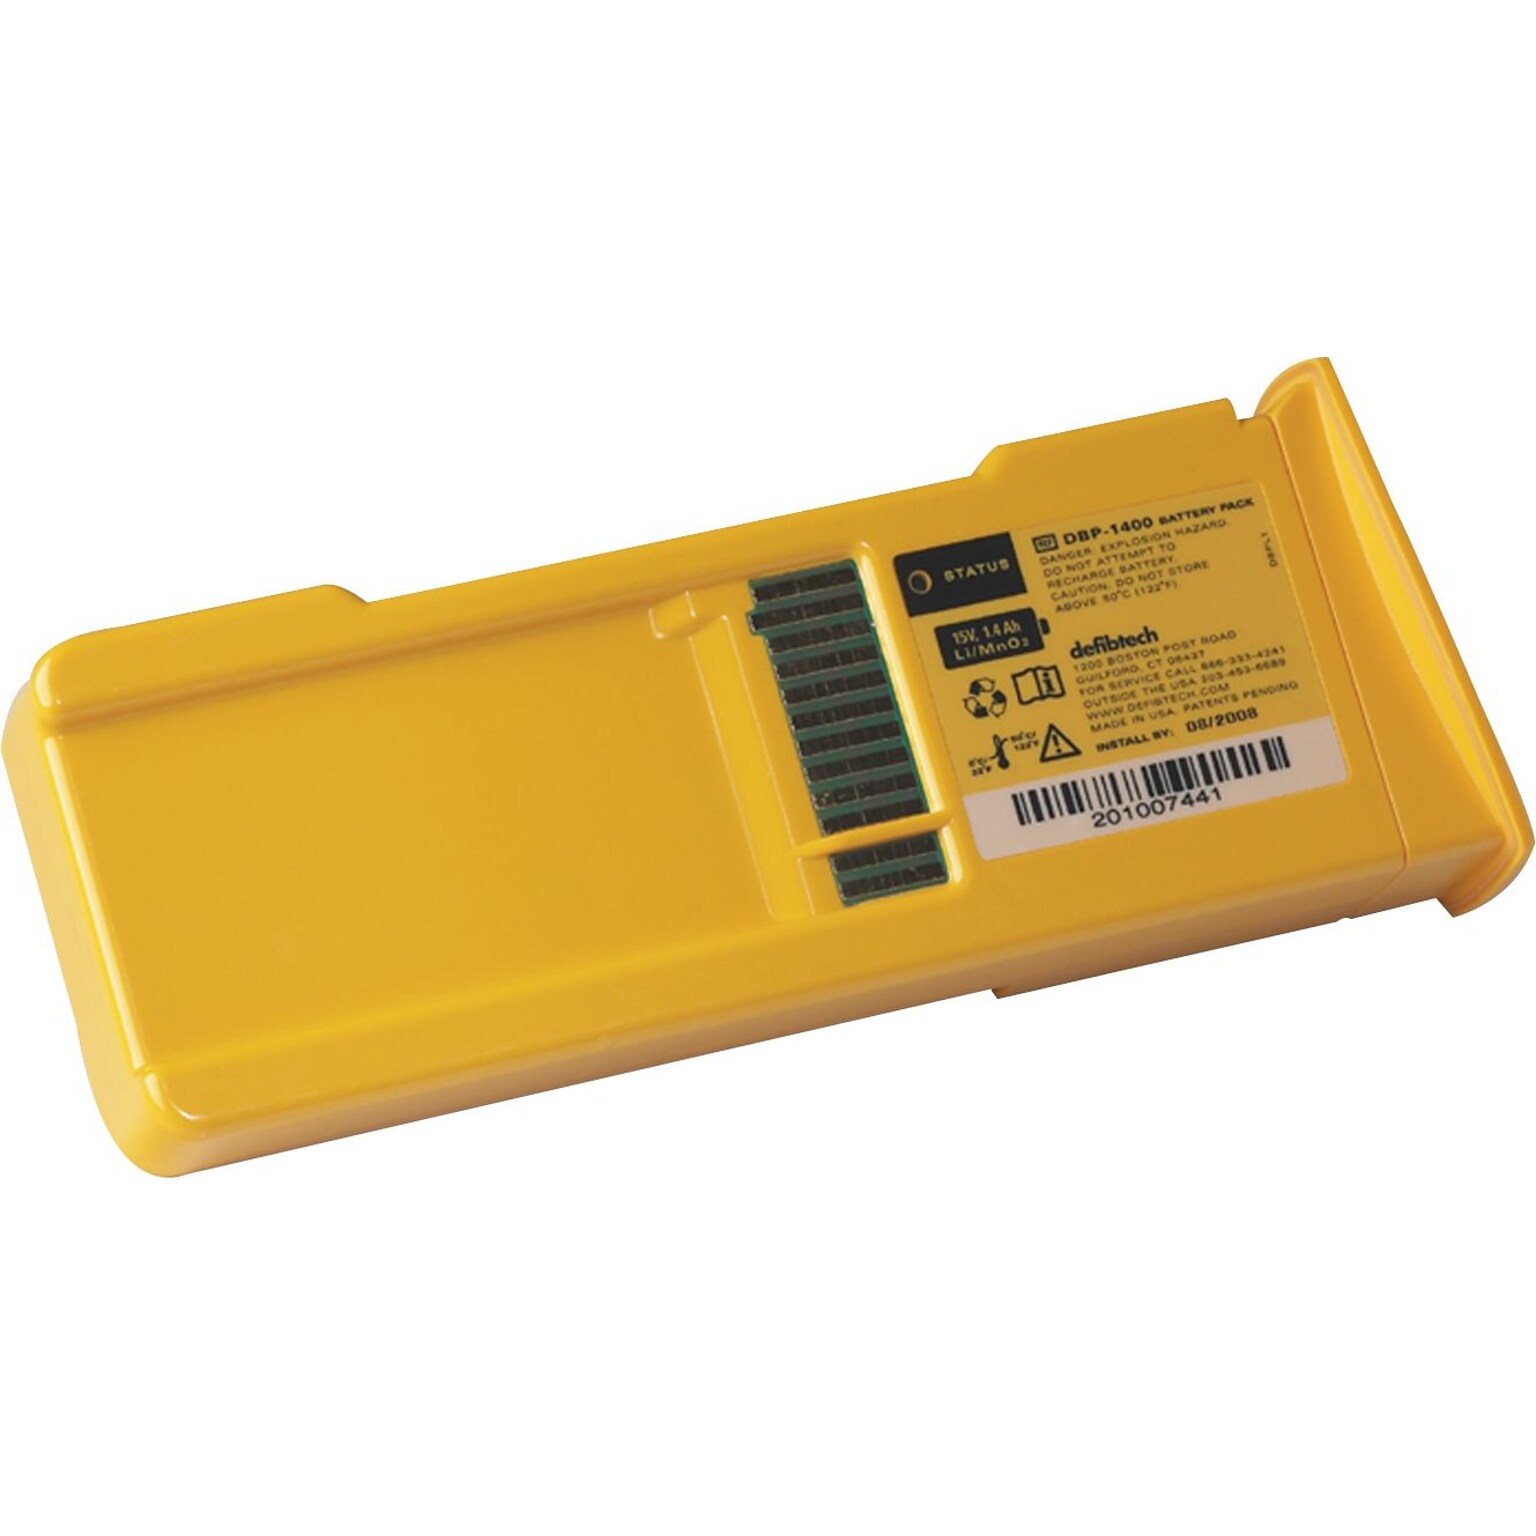 Defibtech 5-Year Battery Pack Replacement for Lifeline AED & Lifeline AUTO (0710-0120)